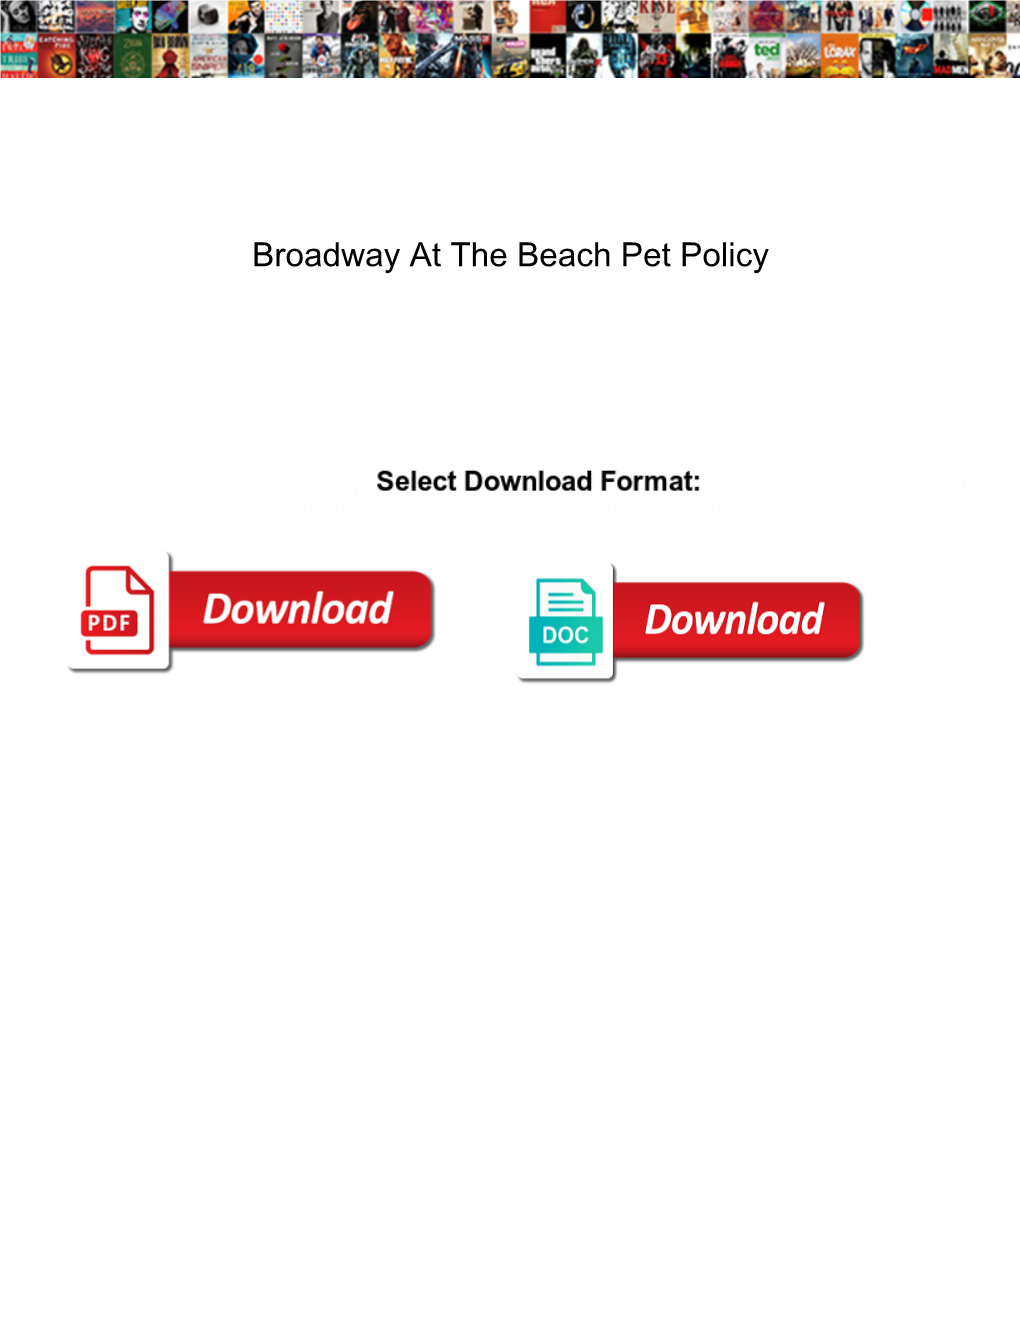 Broadway at the Beach Pet Policy